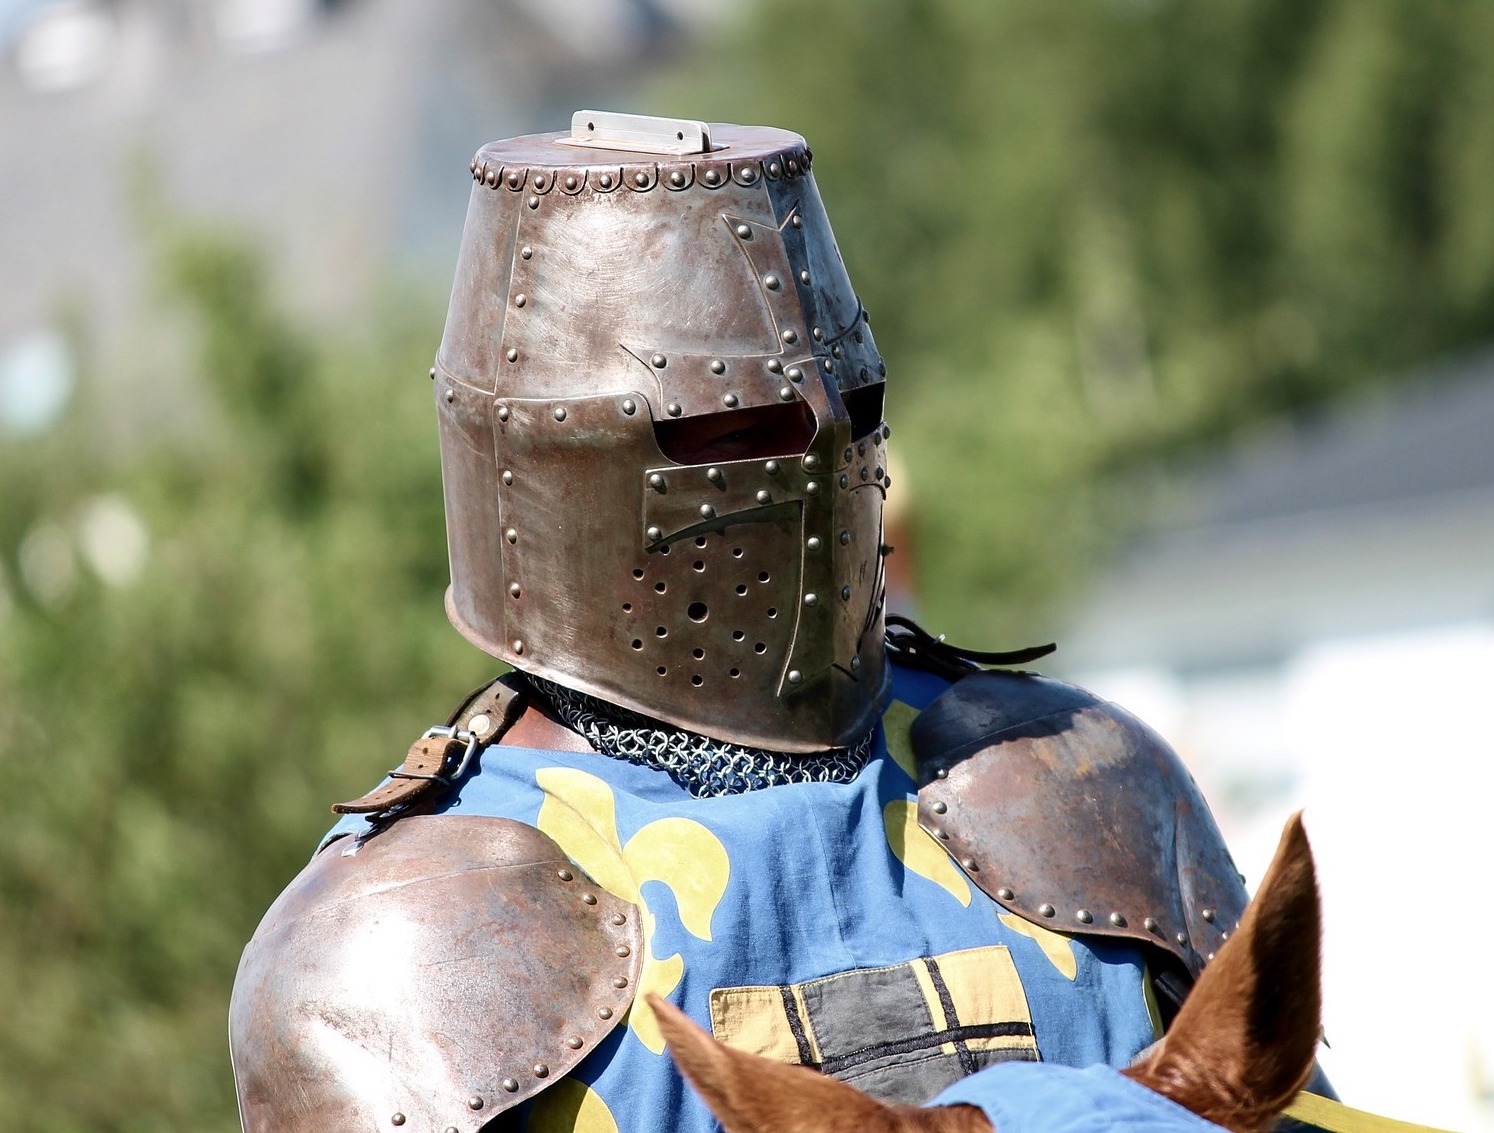 Acquiring Your First Real Armor (Getting Started, part 2)